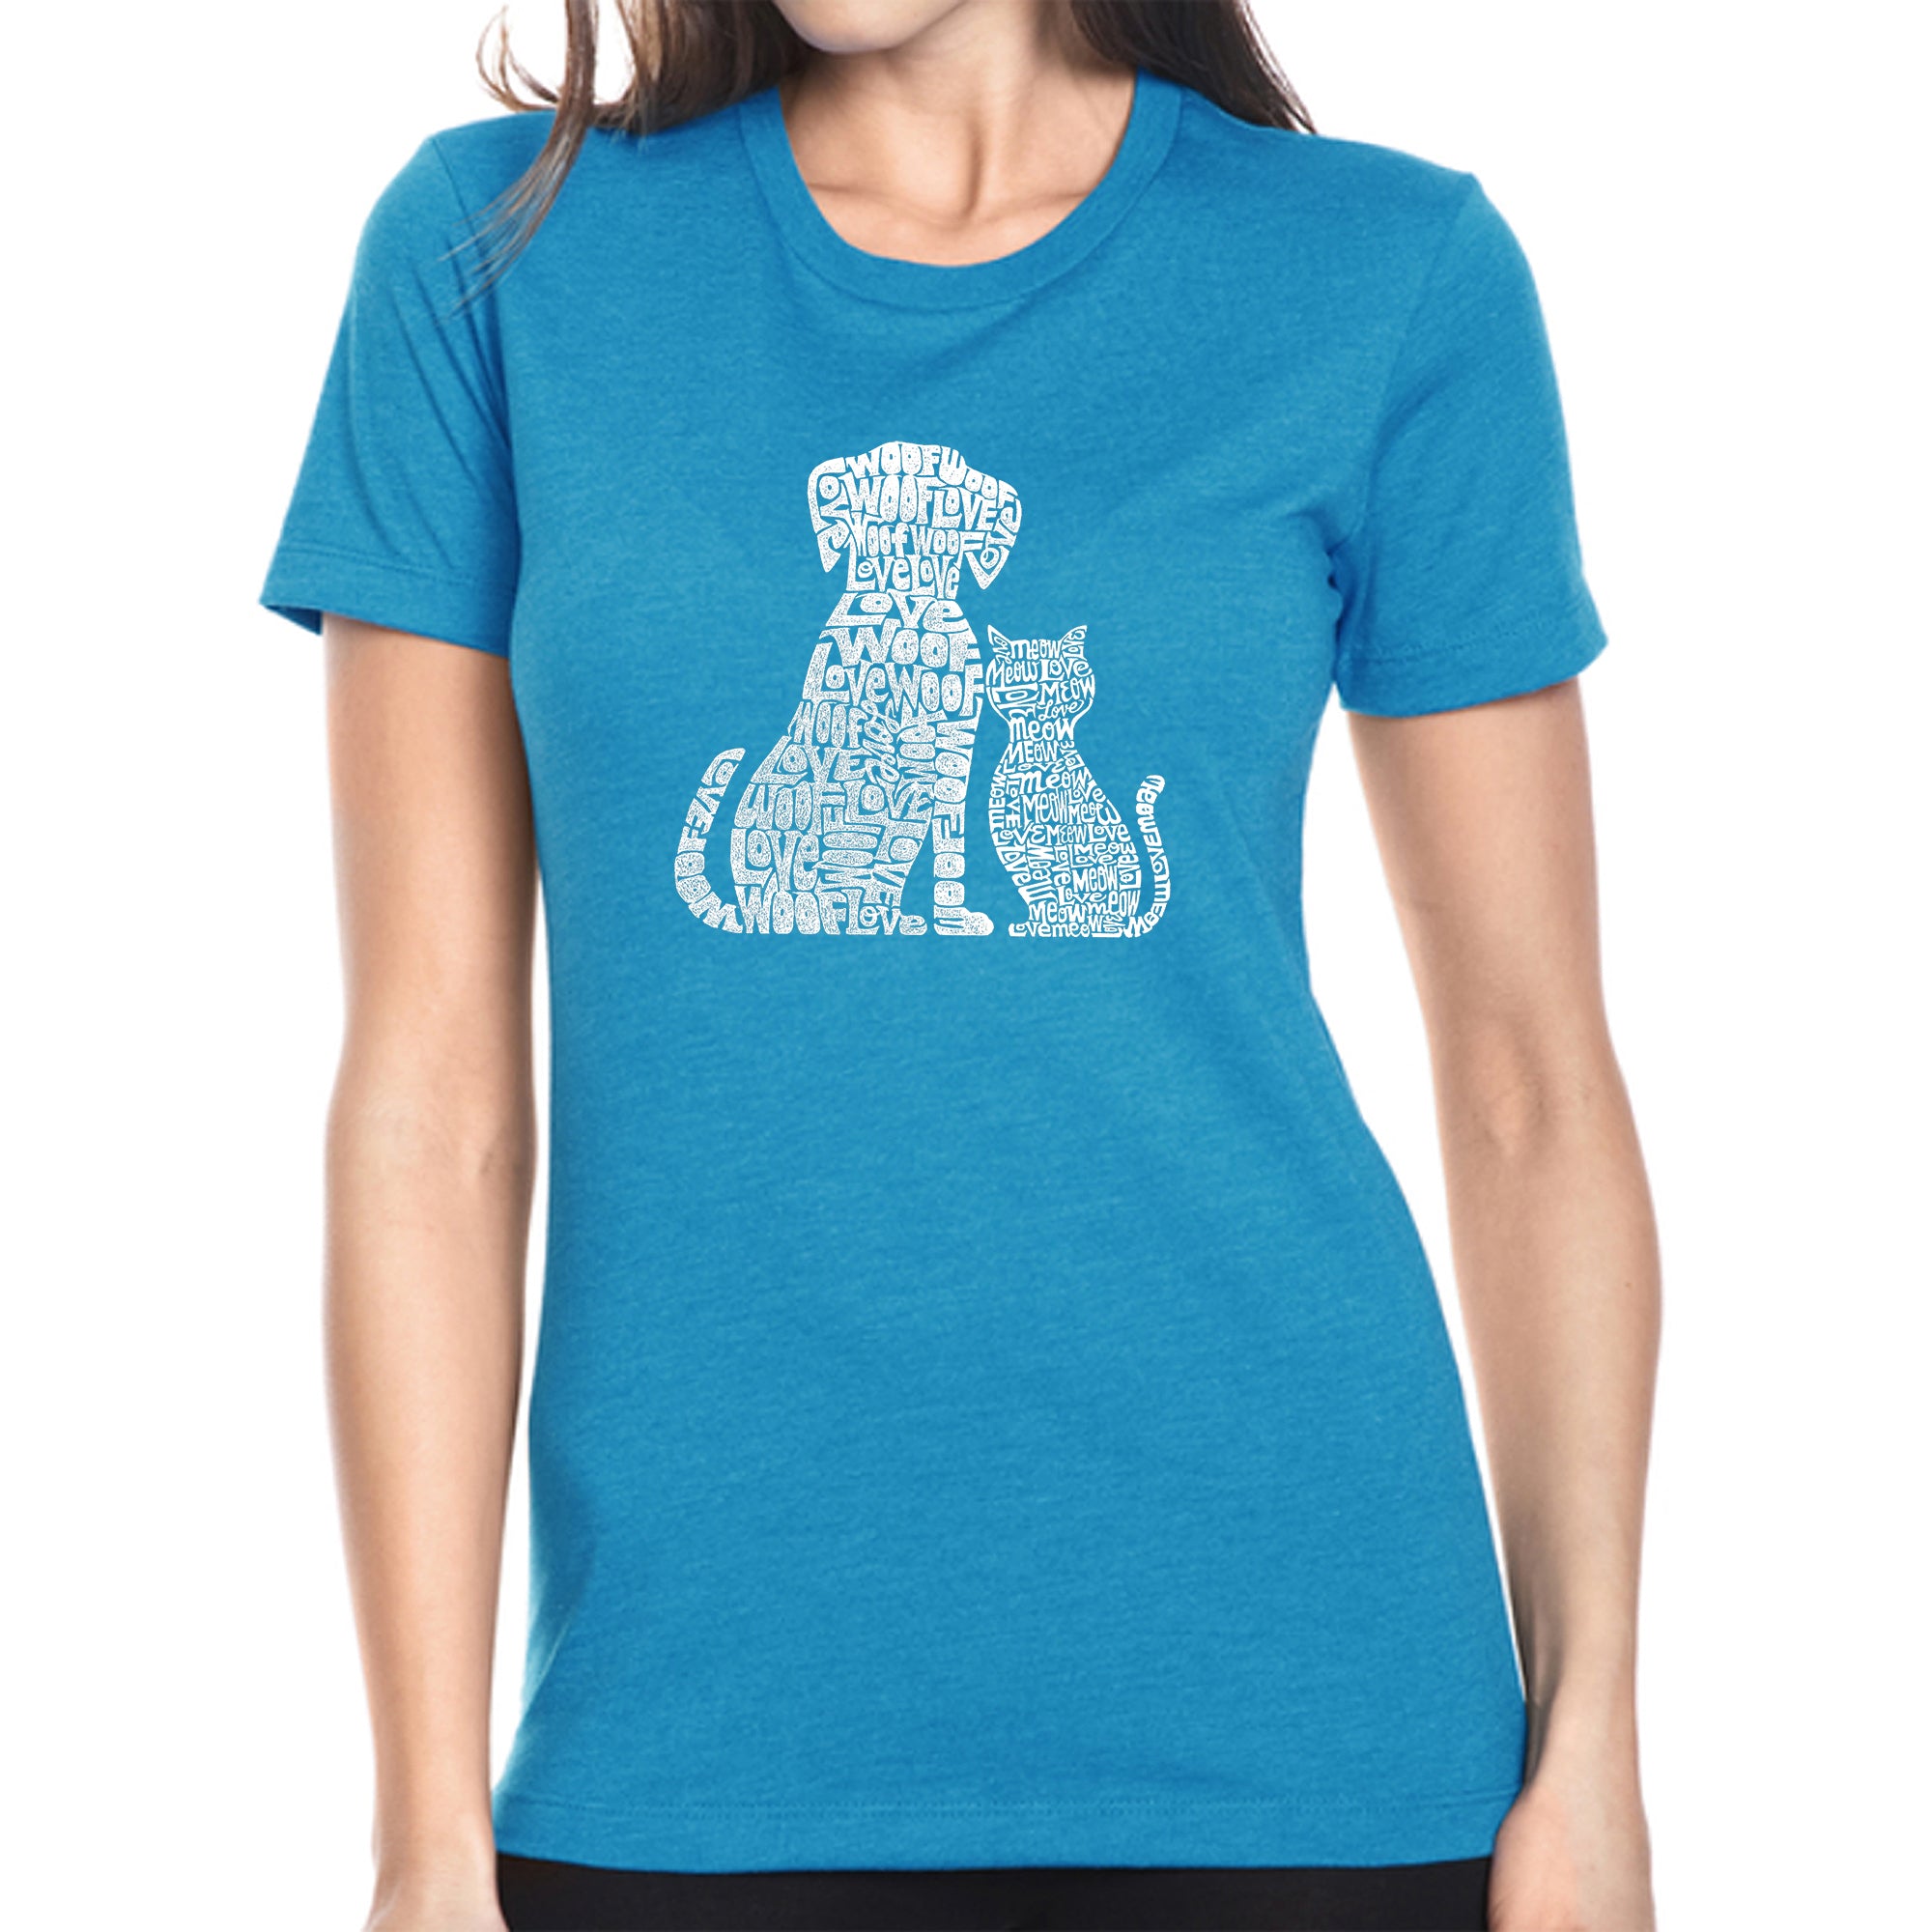 Dogs And Cats - Women's Premium Blend Word Art T-Shirt - Turquoise - Small